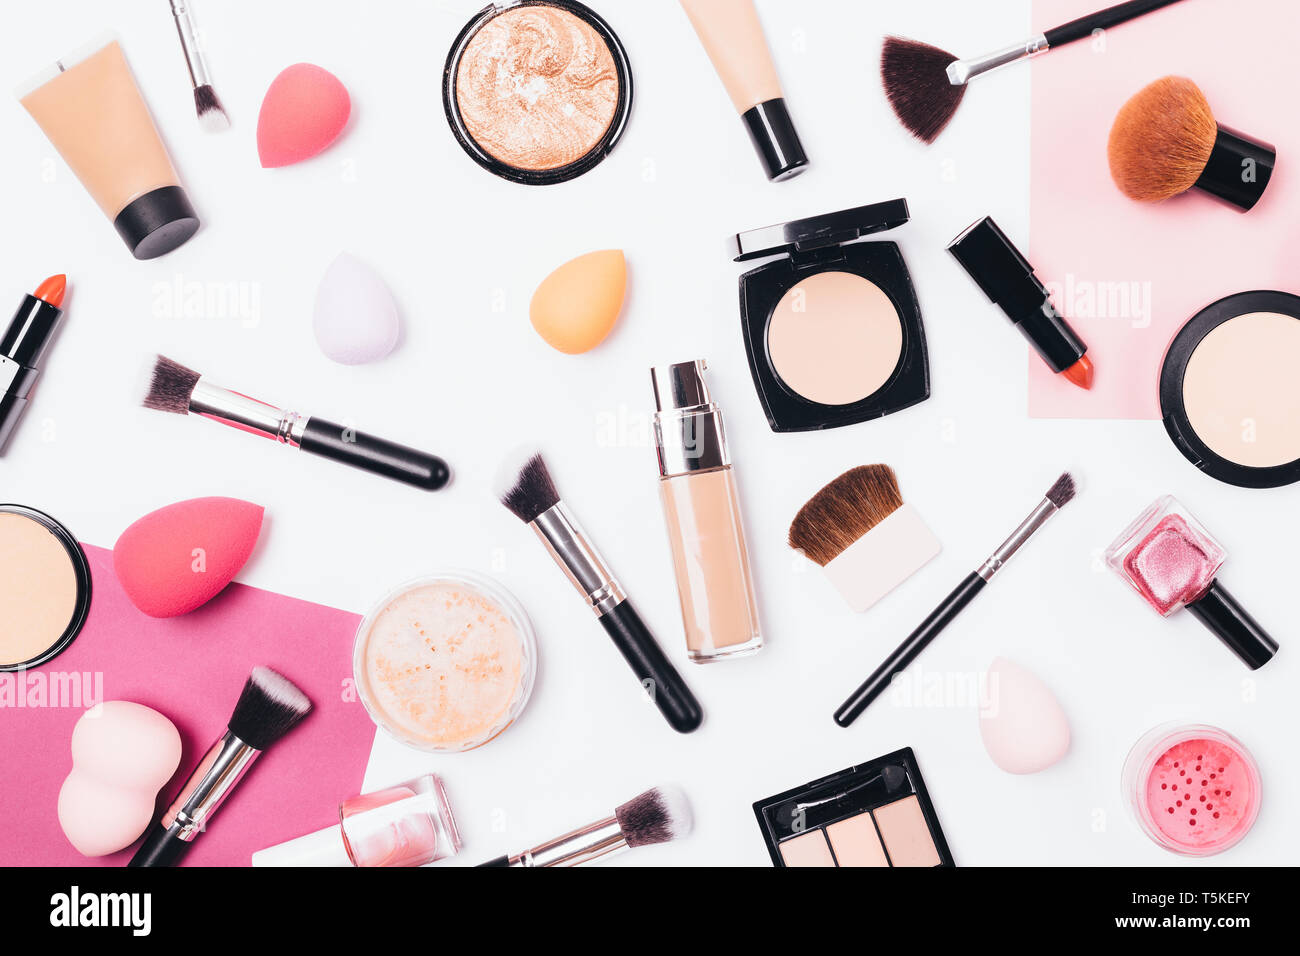 Makeup pattern background of beauty products on wooden table; top view.  Flat lay feminine cosmetics and accessories Stock Photo - Alamy